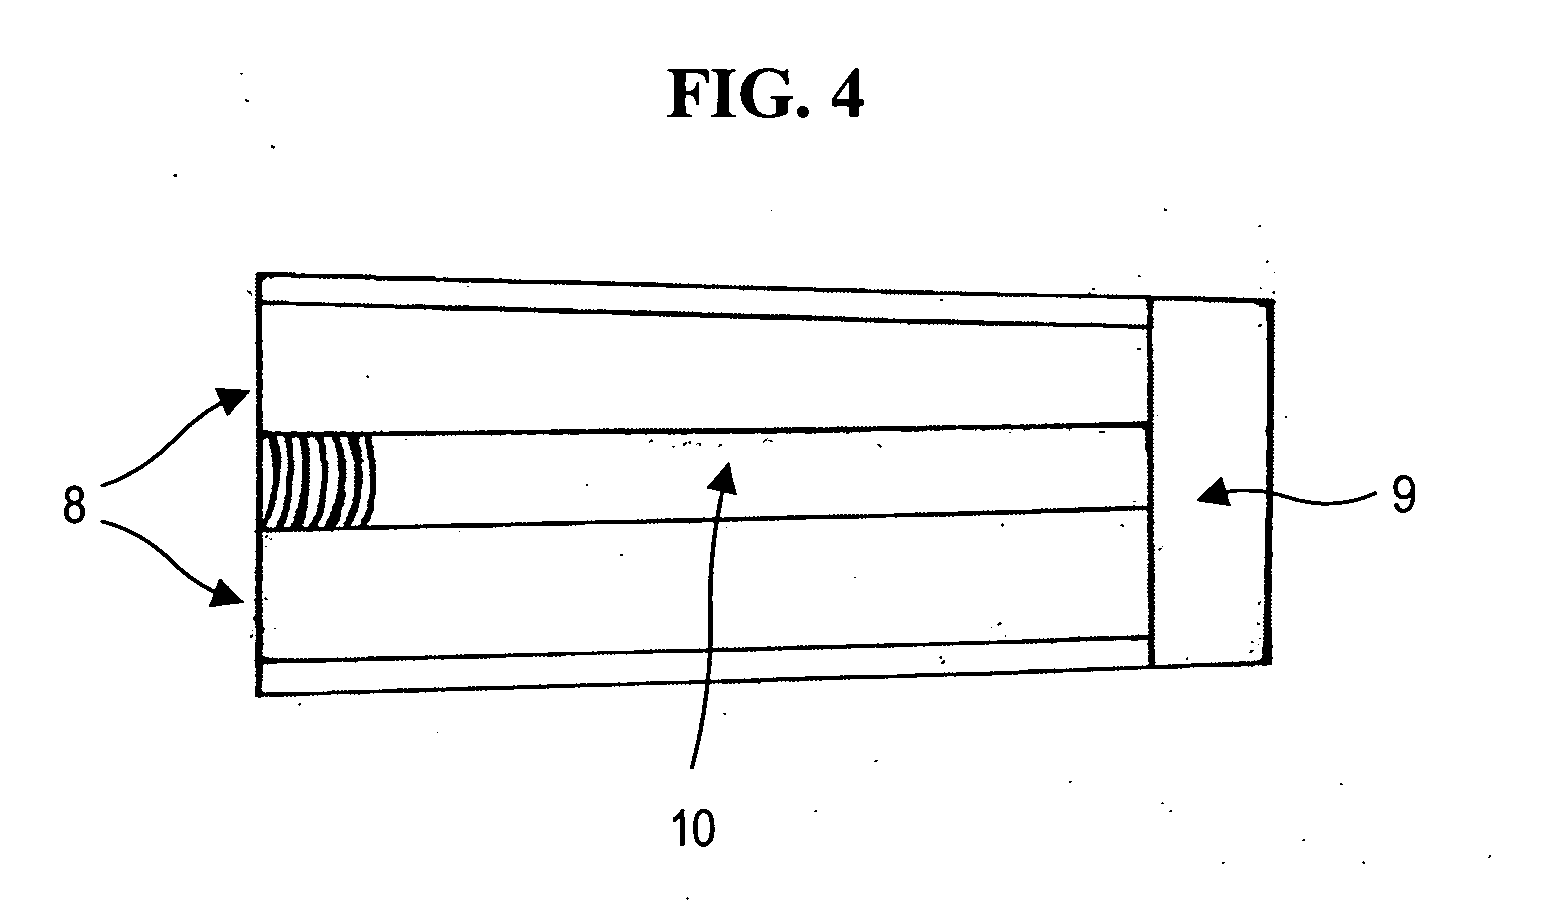 Apparatus and method for anterior intervertebral spinal fixation and fusion